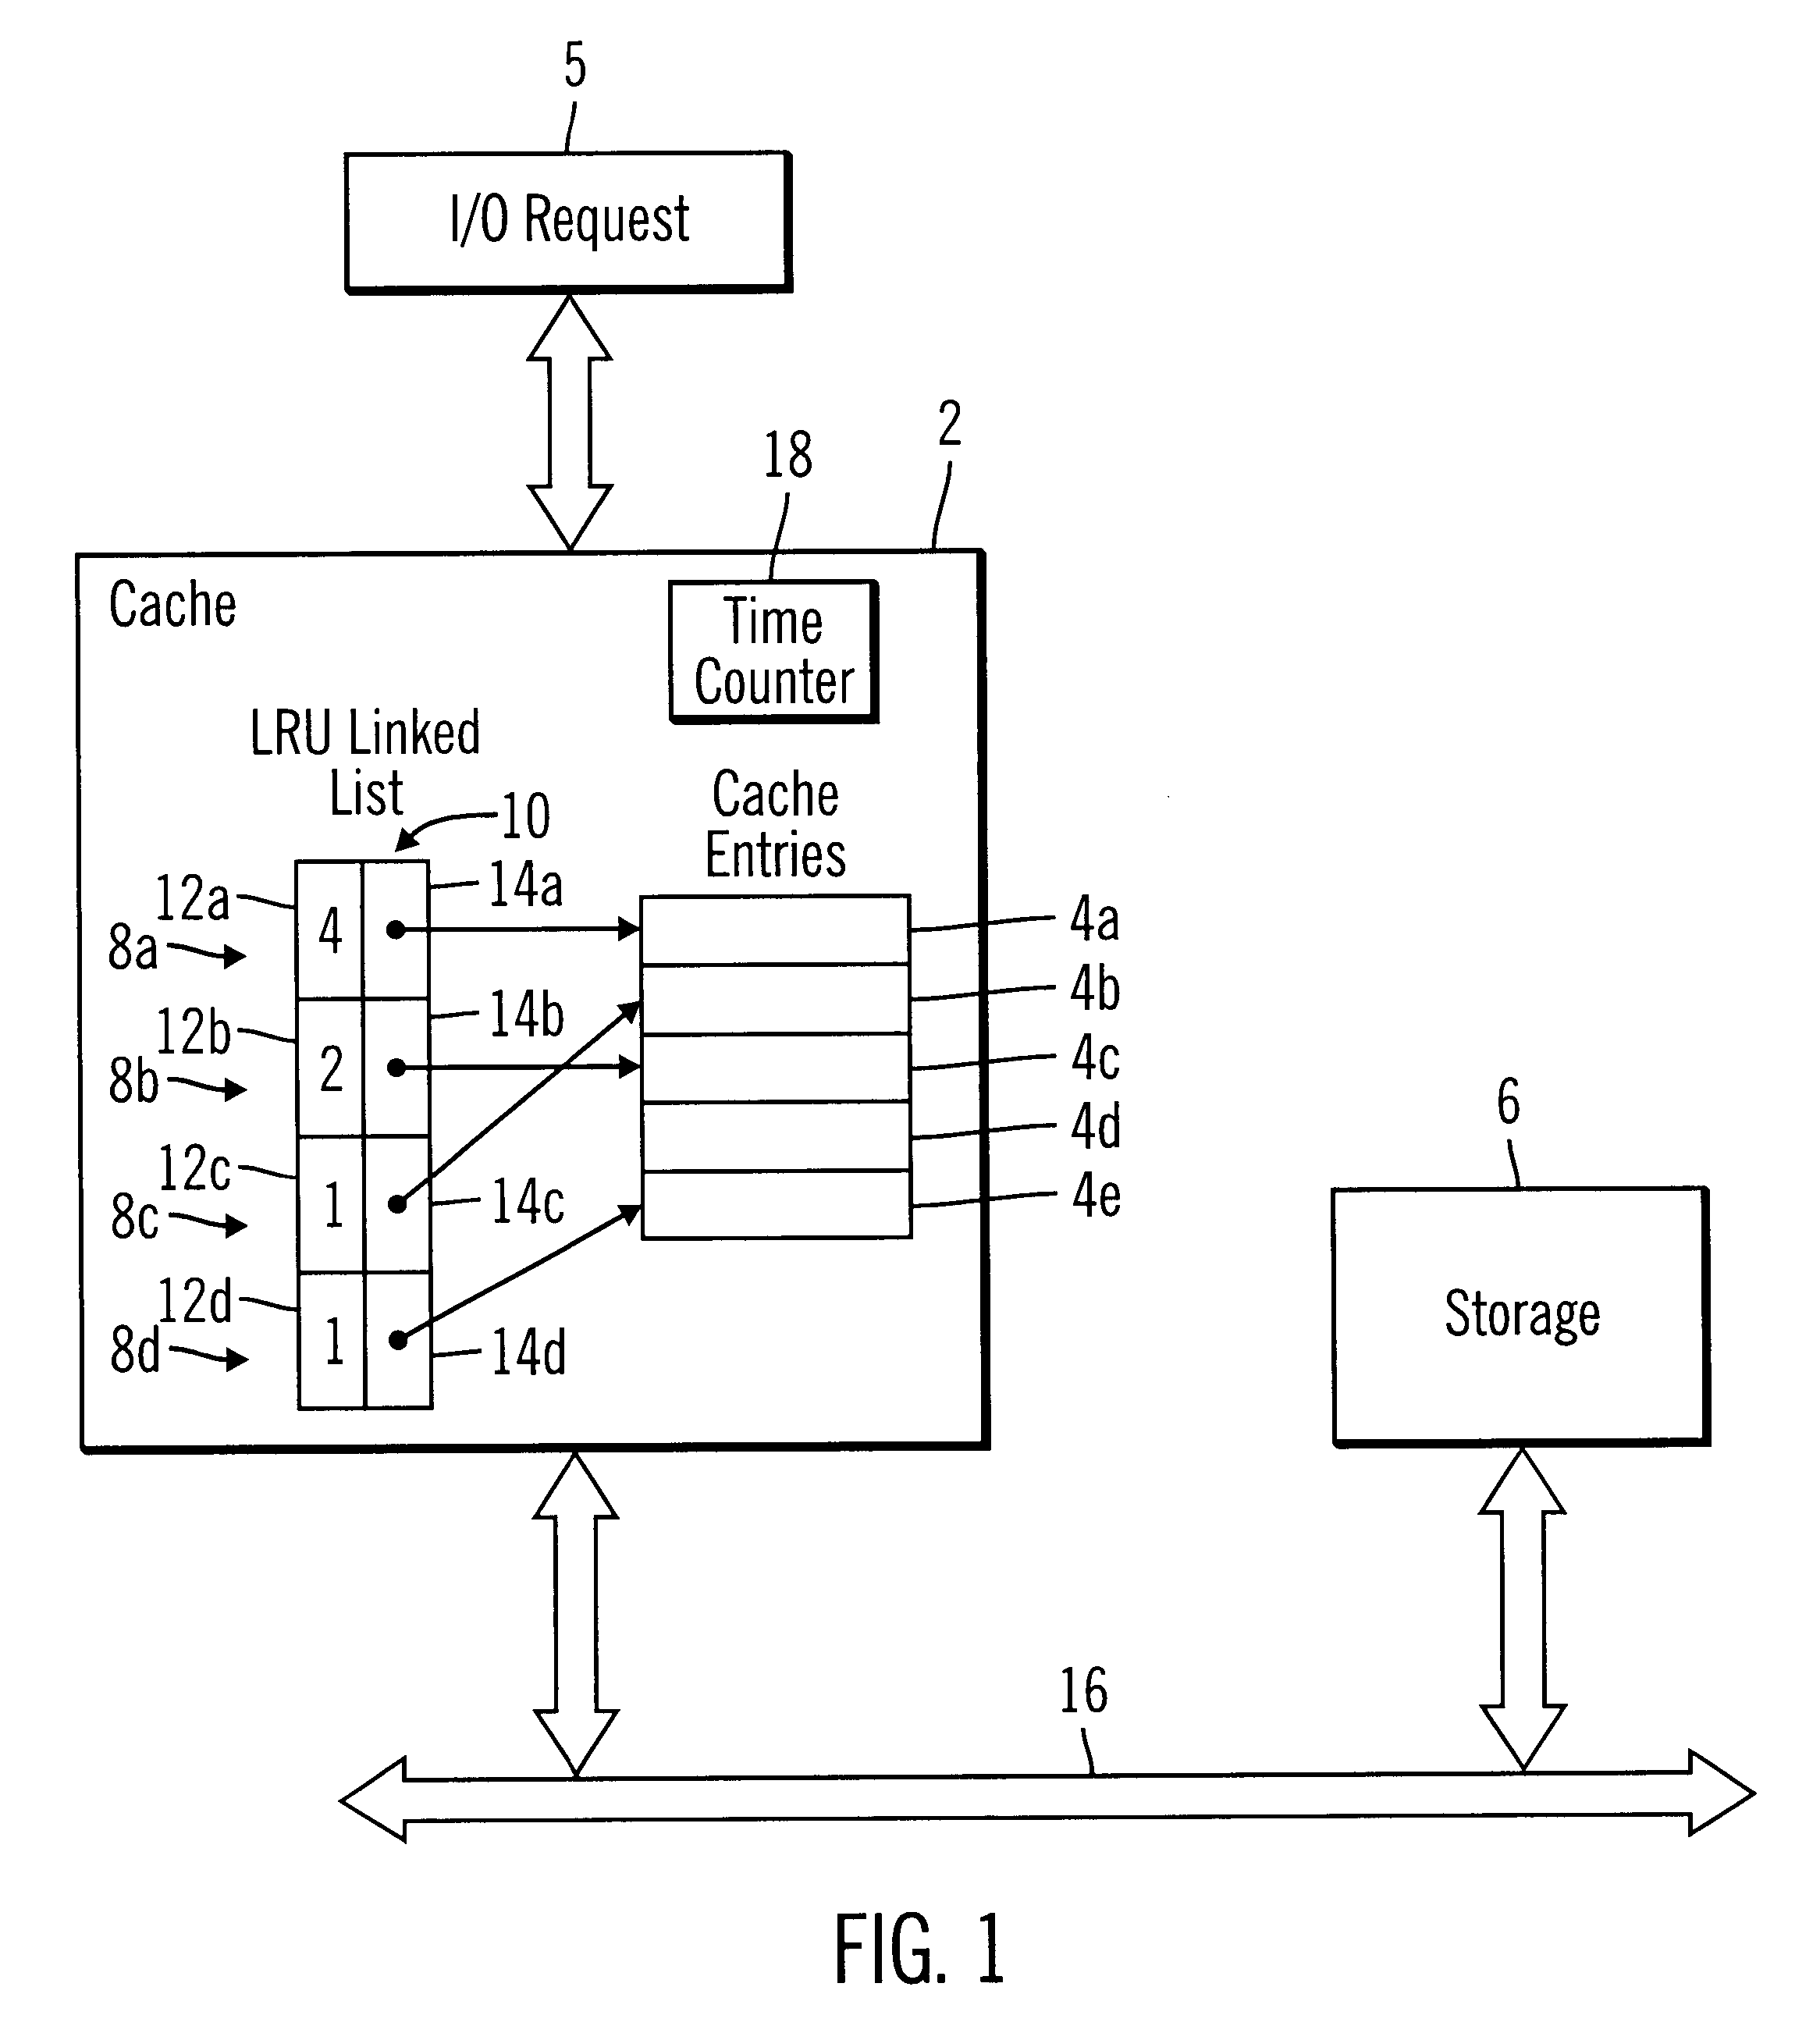 Method, system, and program for demoting data from cache based on least recently accessed and least frequently accessed data